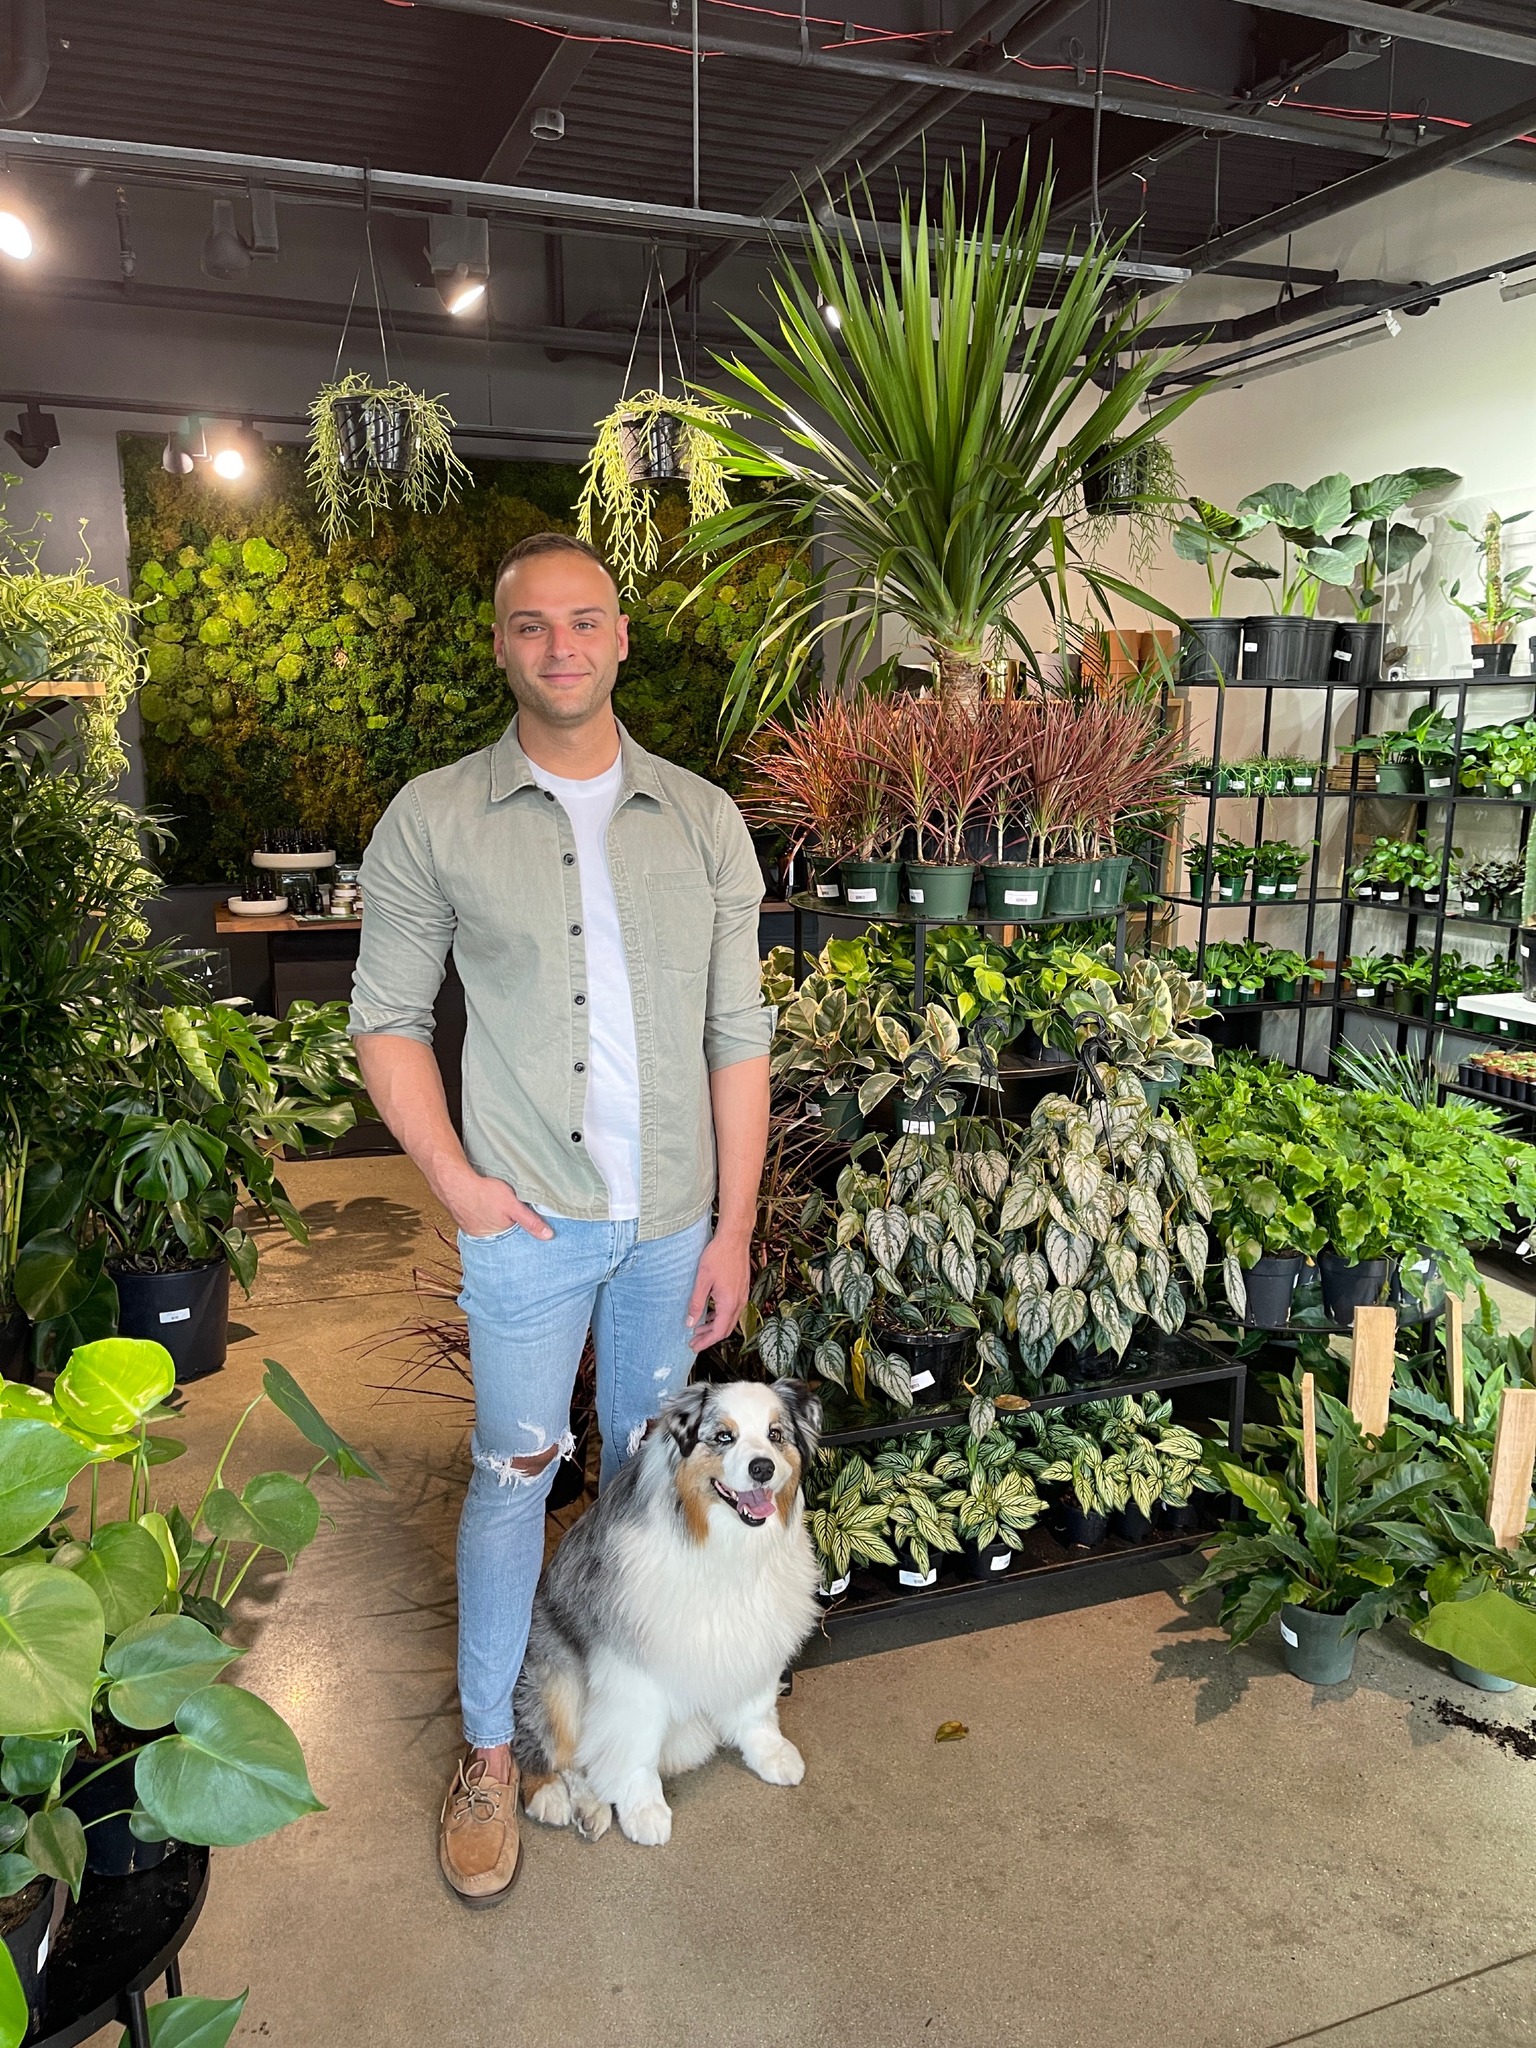 He Sold Plants From Home To Earn Extra Cash. Now, He's Opening A Store In  Humboldt Park Thanks To Pandemic Plant Craze